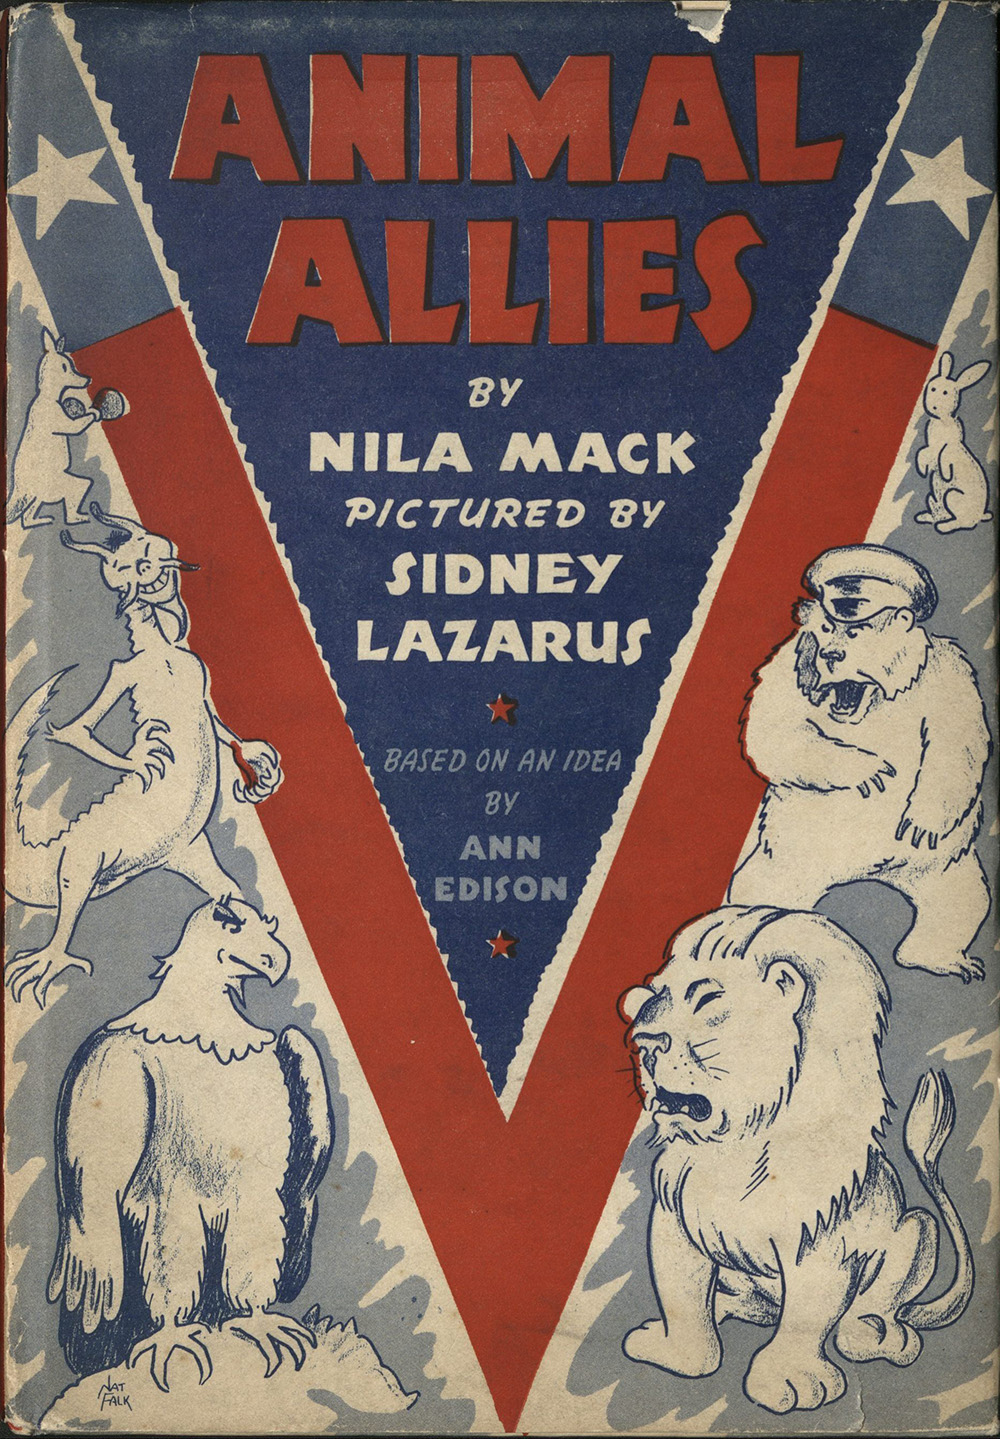 “Animal Allies,” by Nila Mack, illustrated by Sidney Lazarus, 1942. Julian Messner, Inc. 